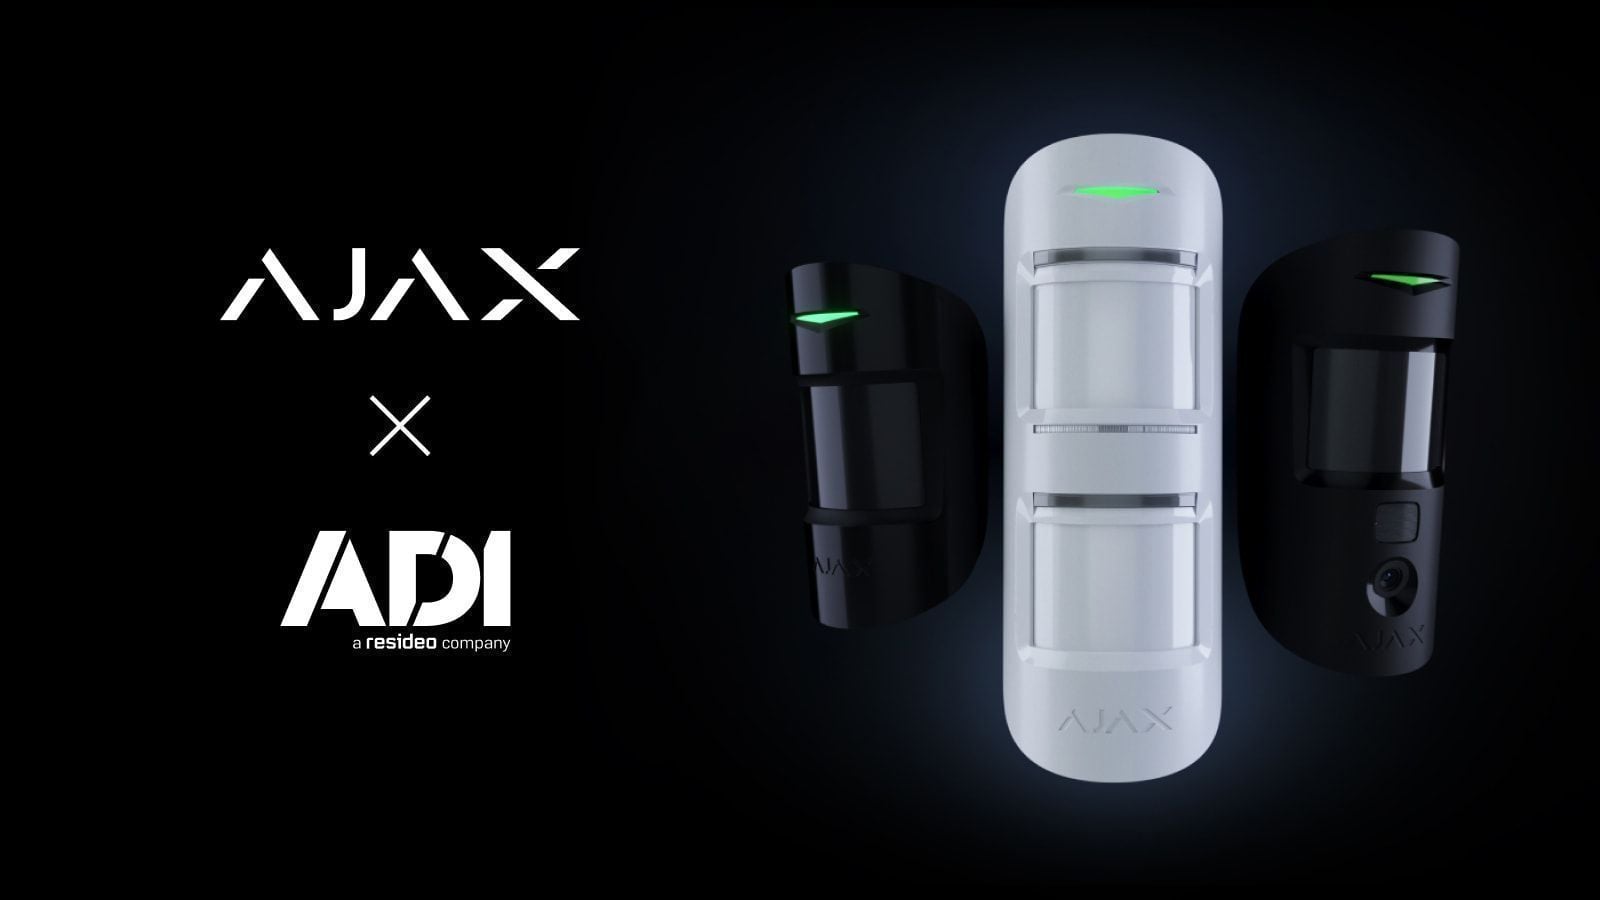 Ajax Systems expands product availability across North America through  ADI Global Distribution